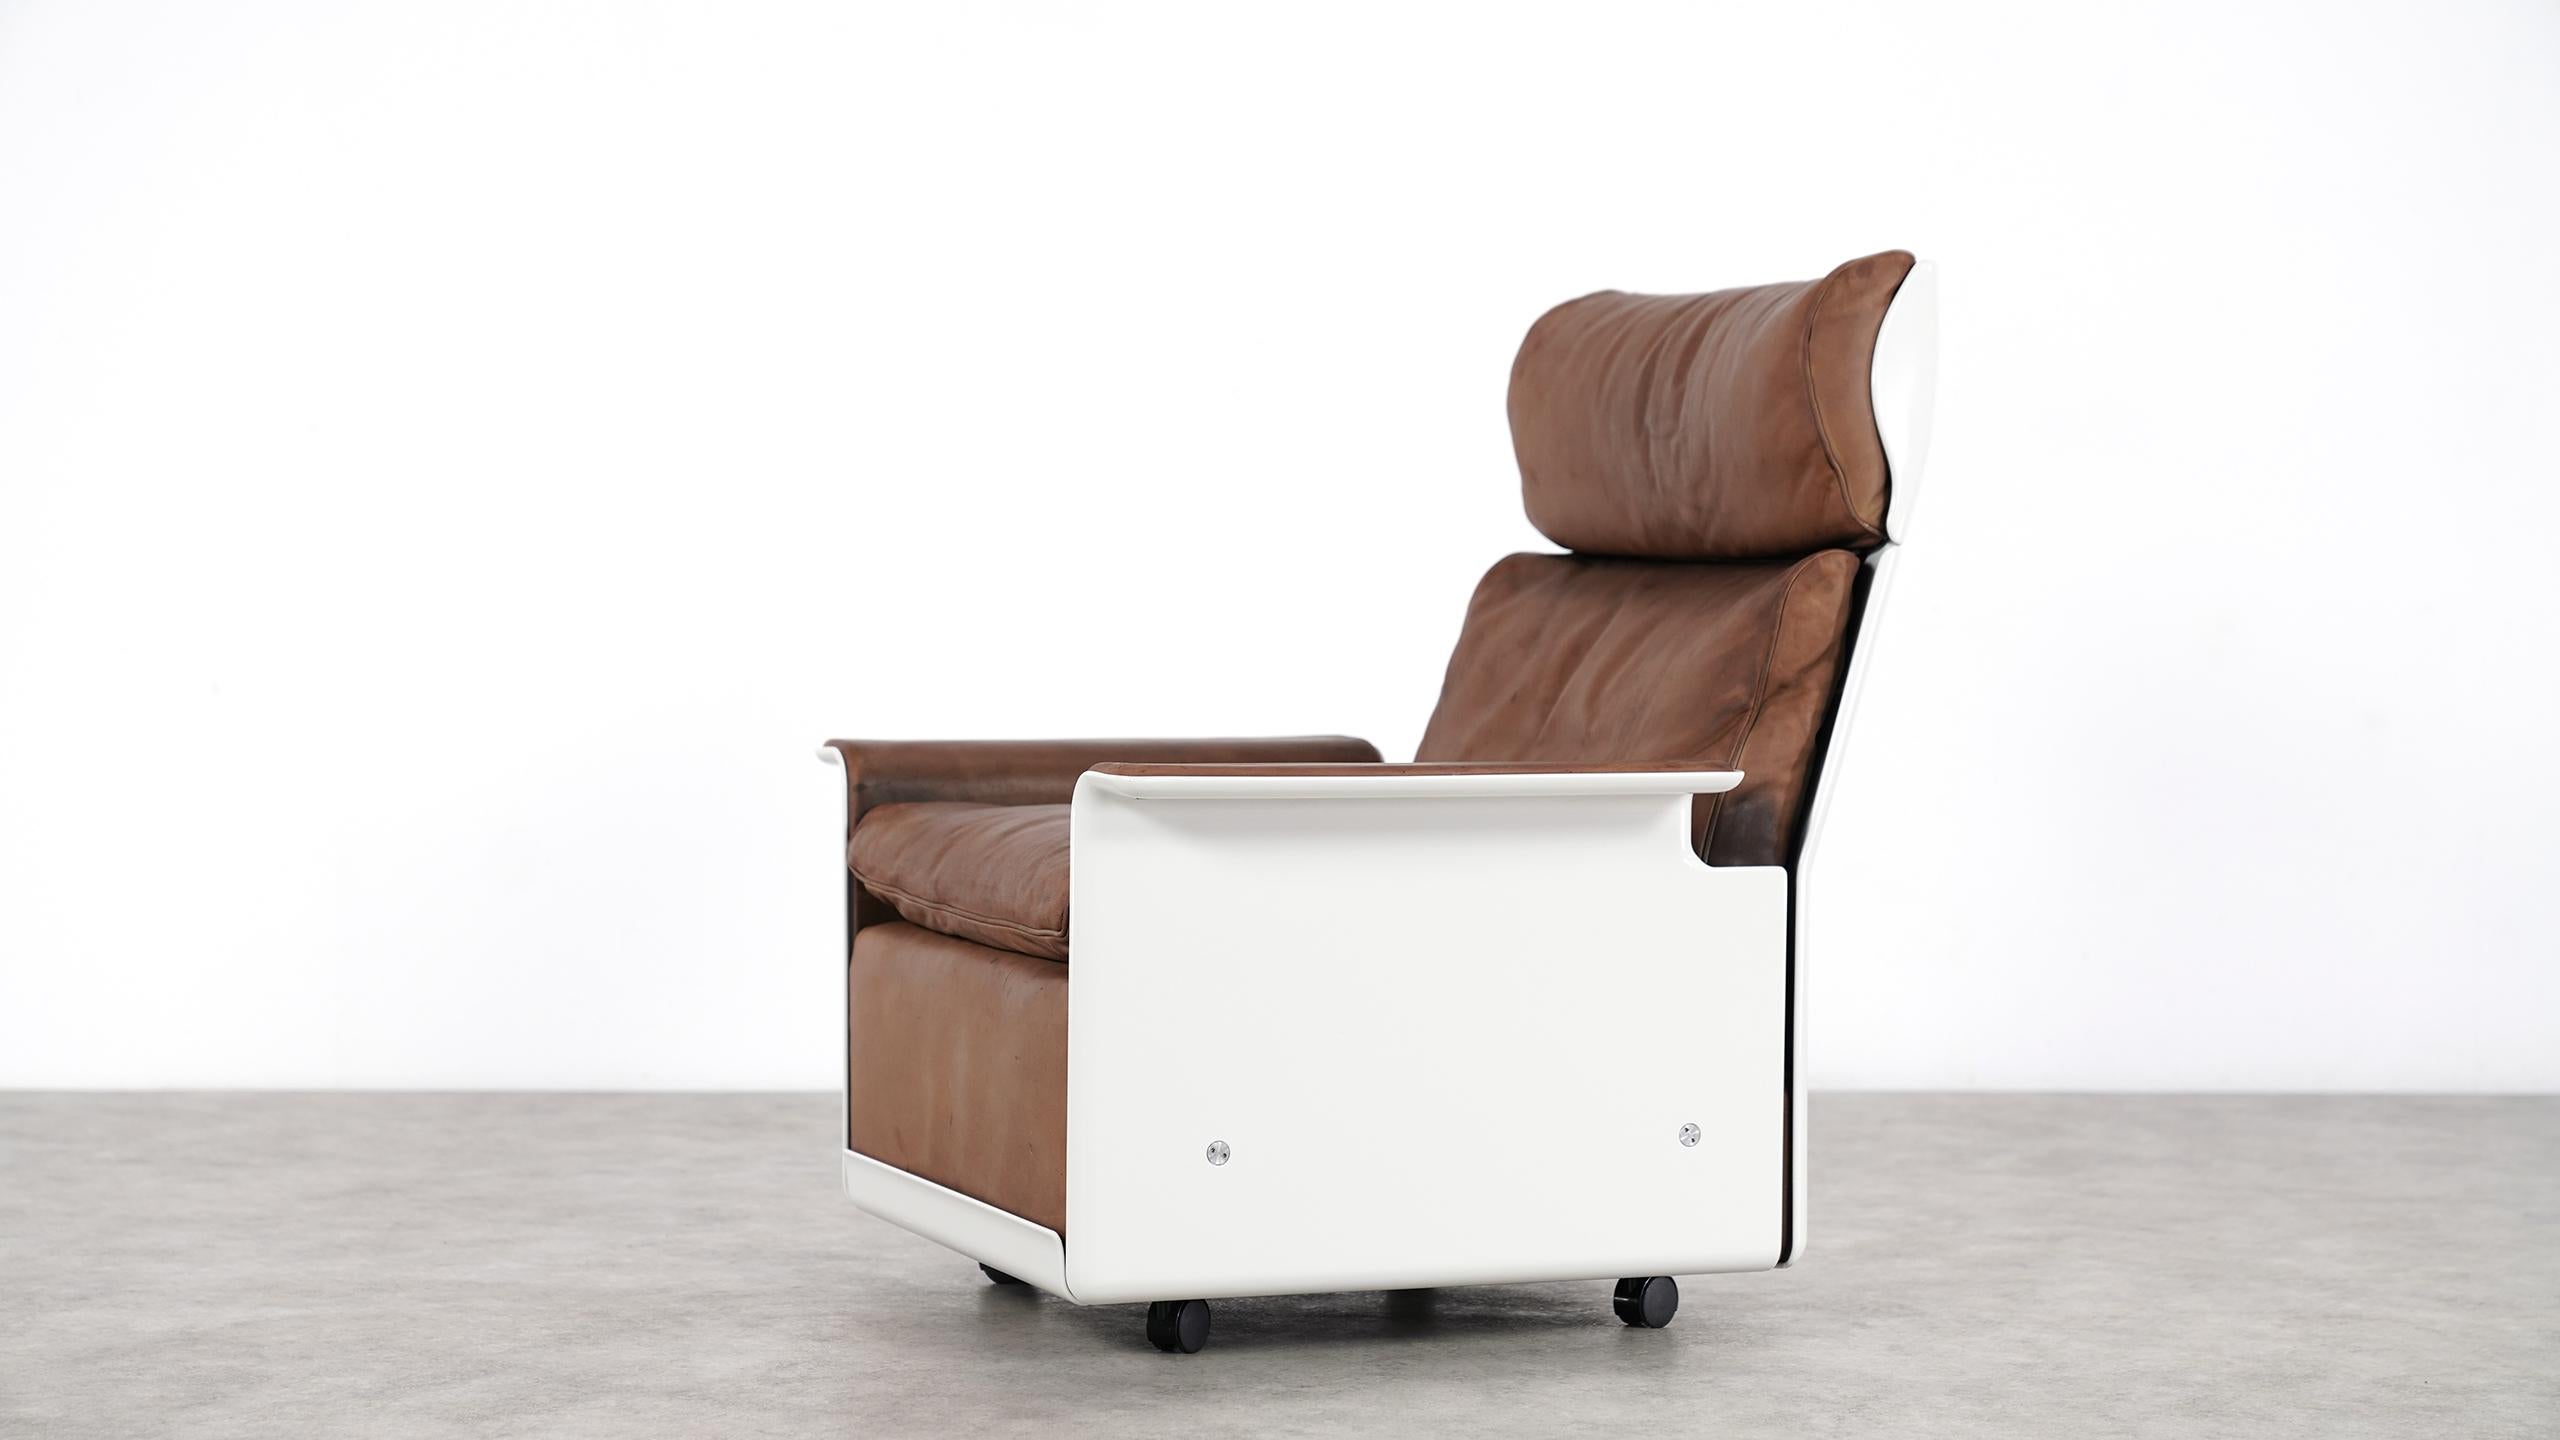 Dieter Rams Lounge Chair RZ 62 1962 by Vitsœ, Germany, Chocolate Leather 5